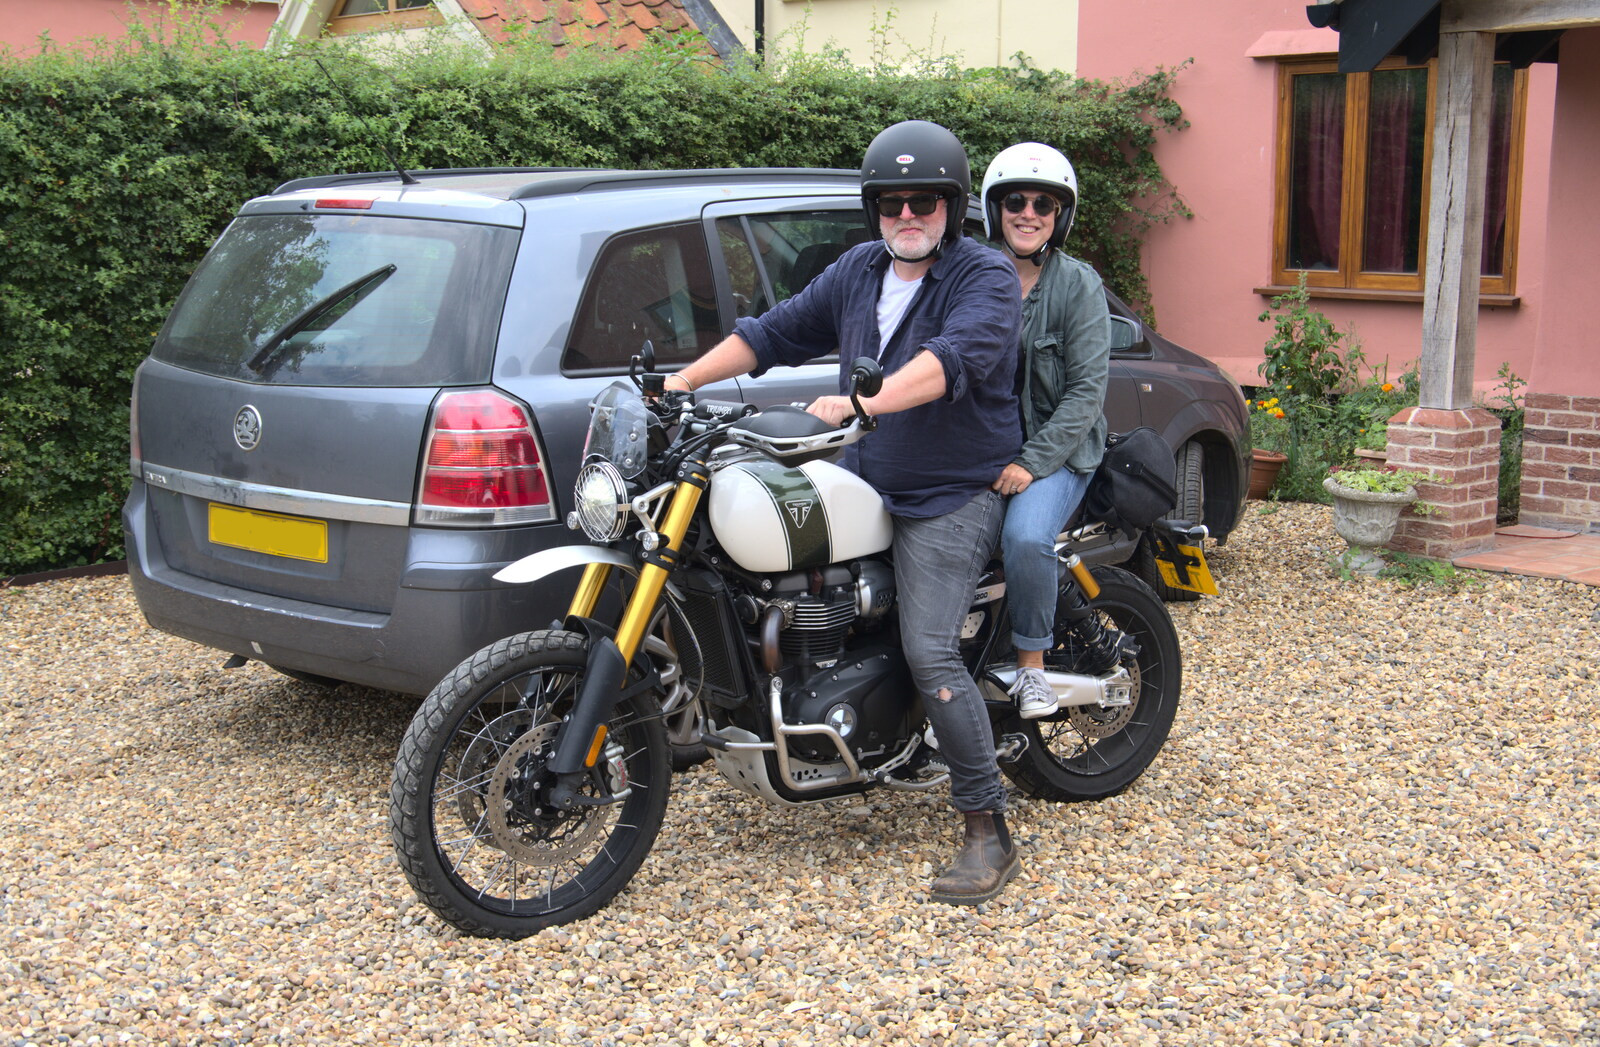 The riders are ready from Jules Visits, and a Trip to Tyrrel's Wood, Pulham Market, Norfolk - 16th August 2020